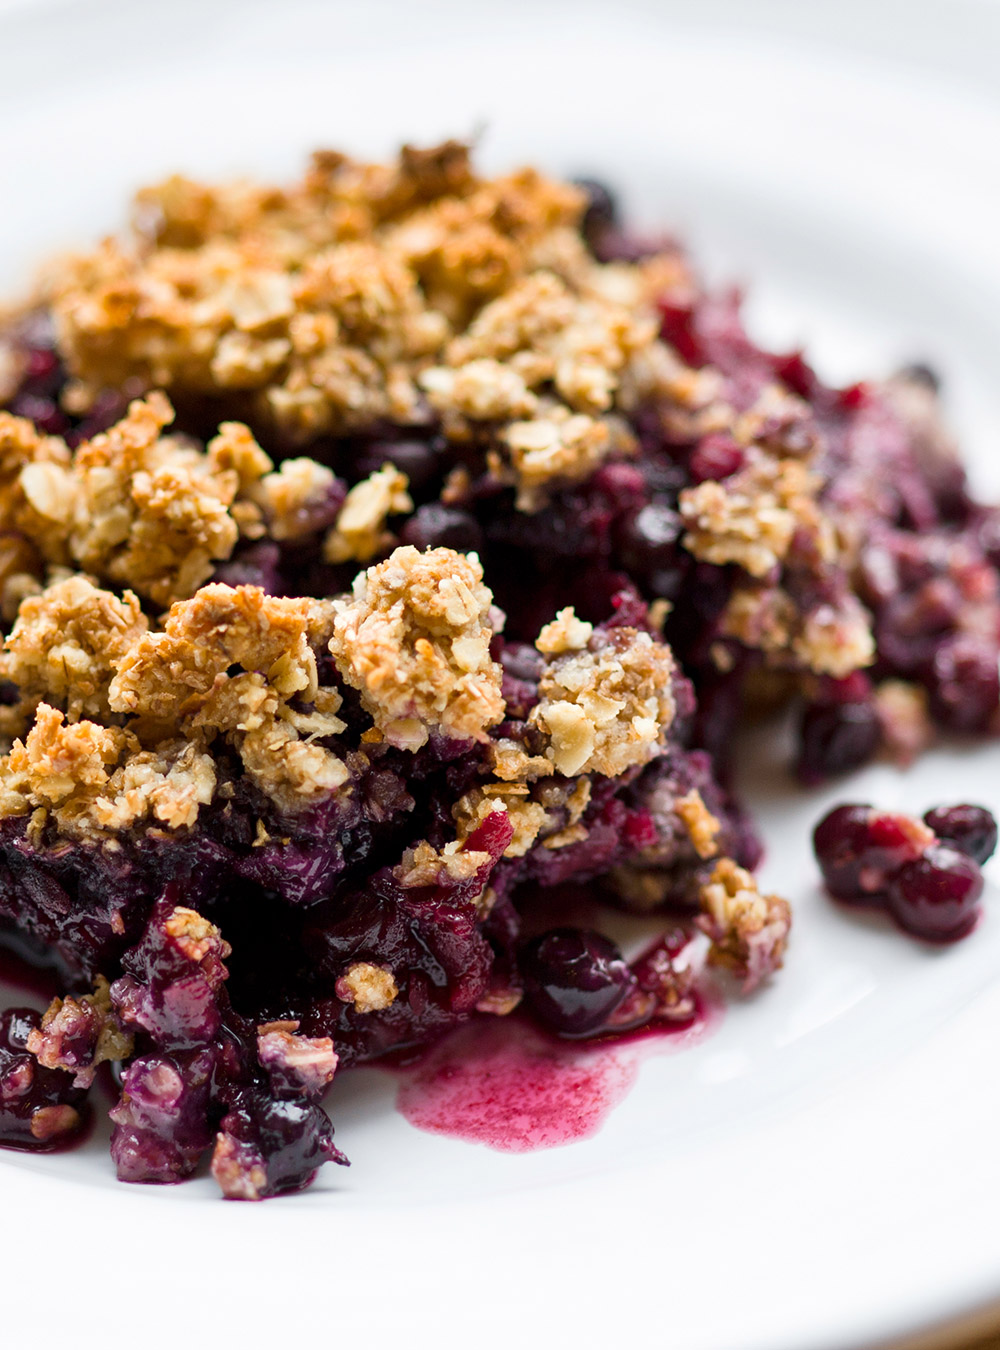 Apple and Blueberry Crisp, the healthier version